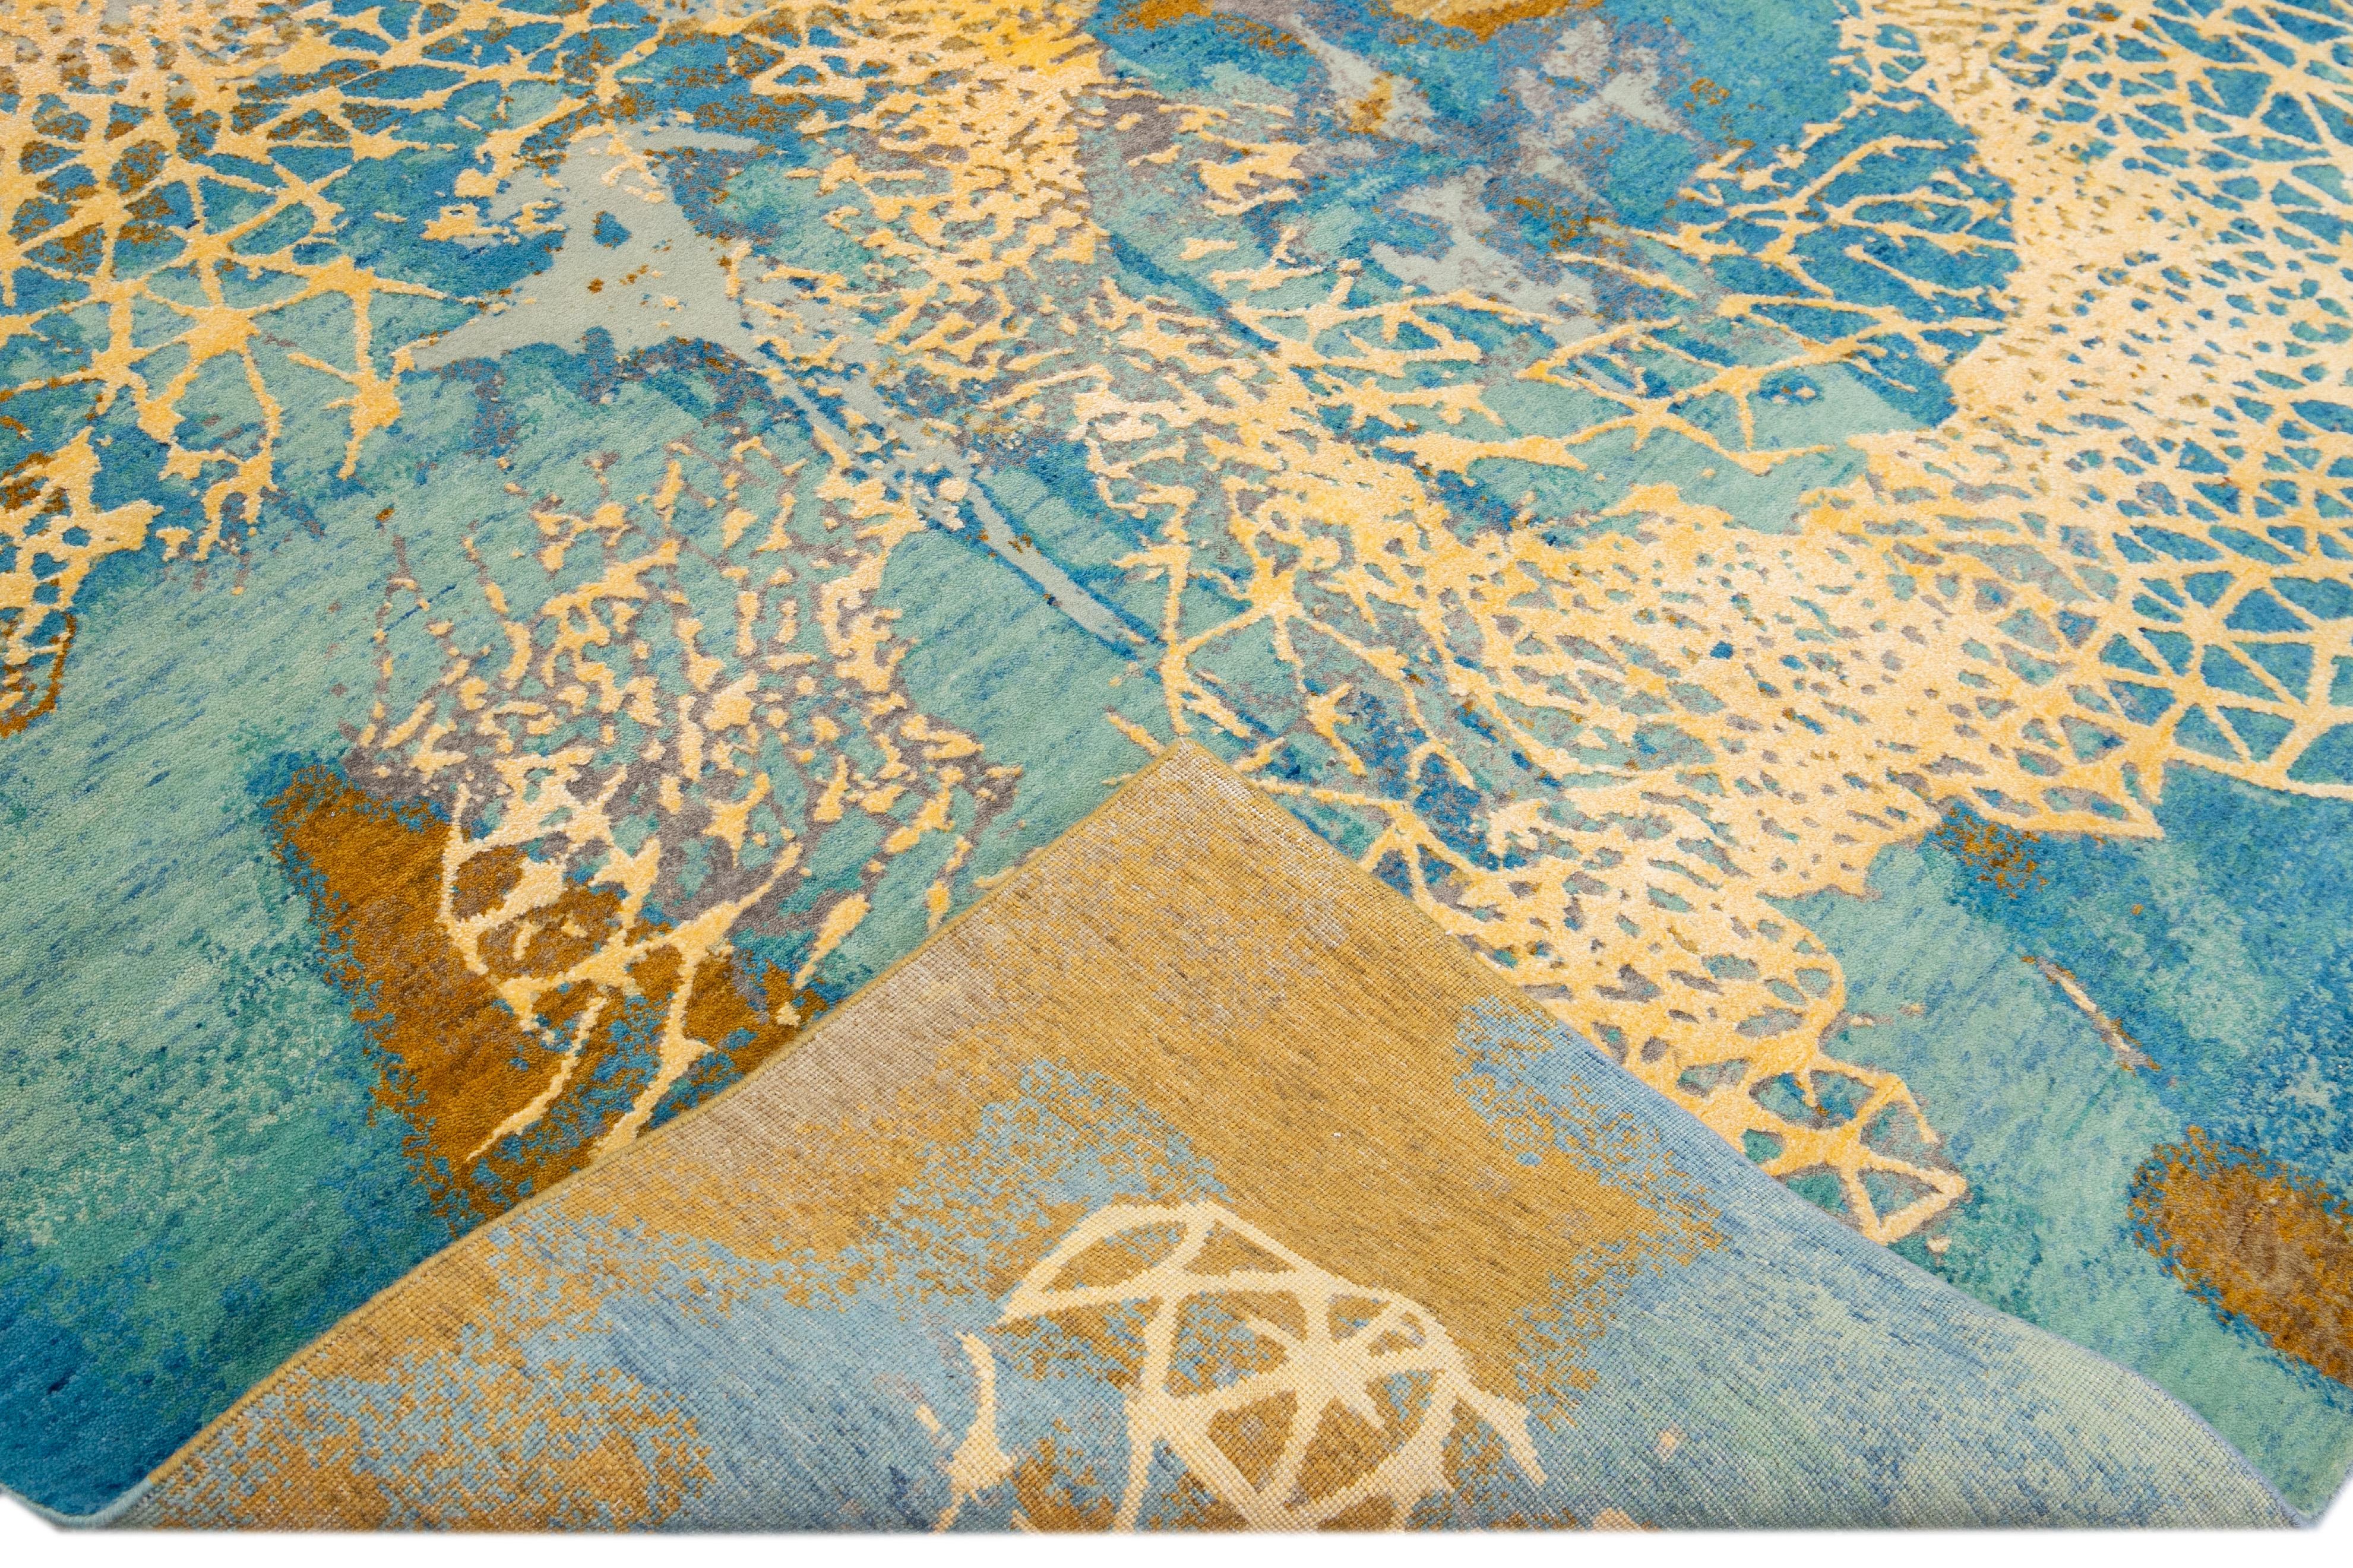 Beautiful modern Indian hand-knotted wool and silk rug with a golden-teal field. This Modern rug has red, gray, and beige accents a gorgeous layout Abstract coastal design.

This rug measures: 9'1